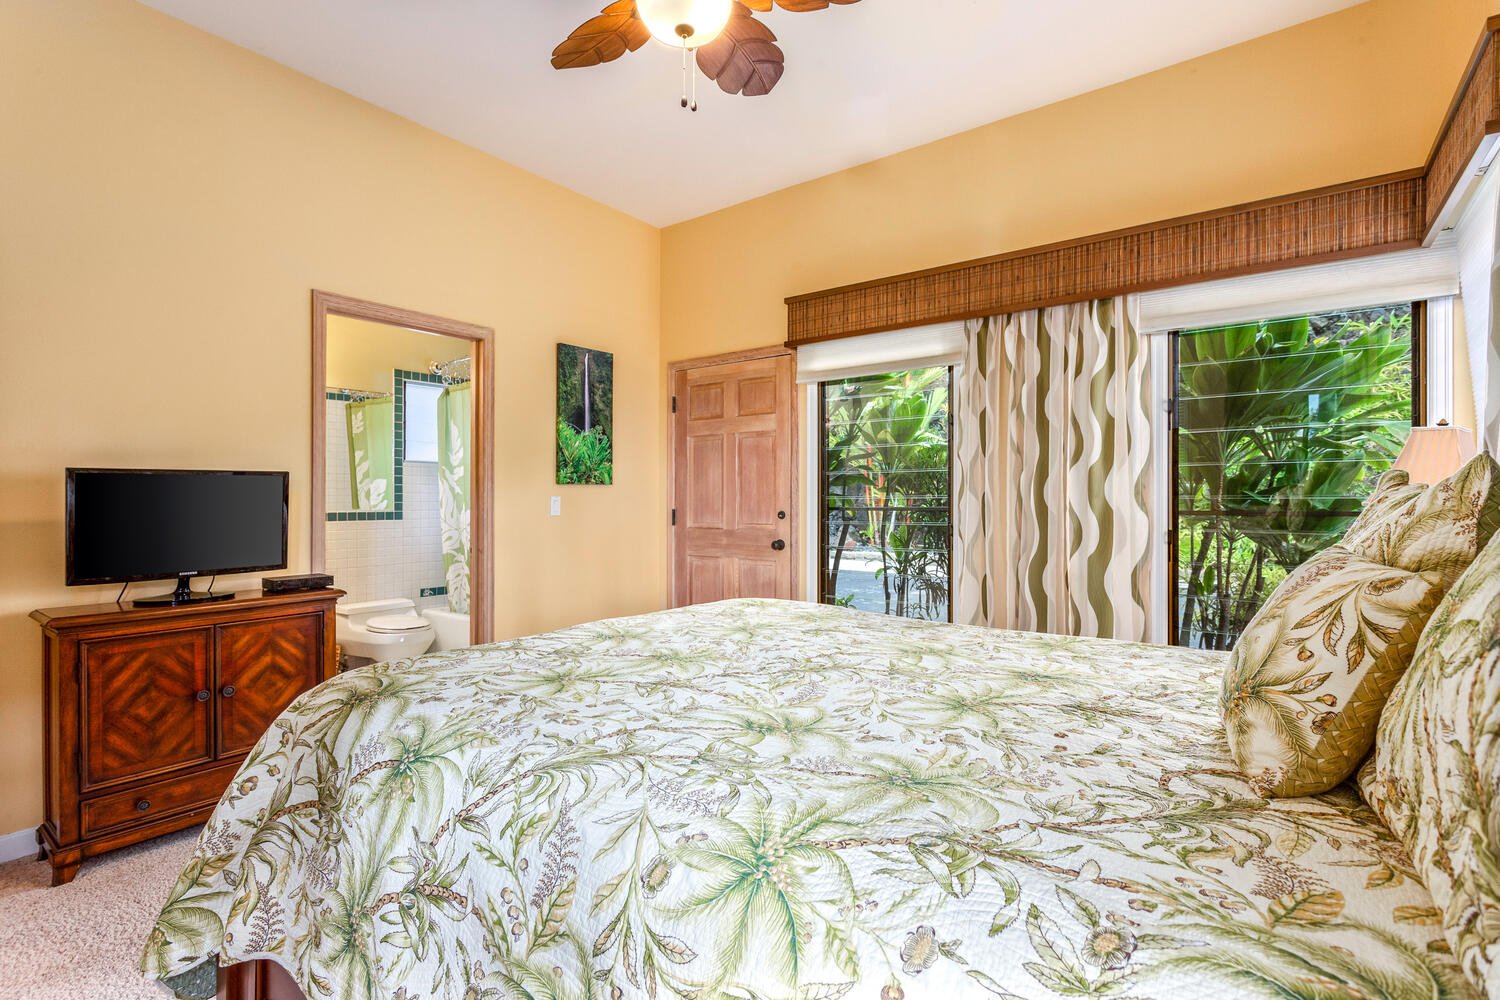 Garden view and an en suite bathroom make this a private place for additional house guests.